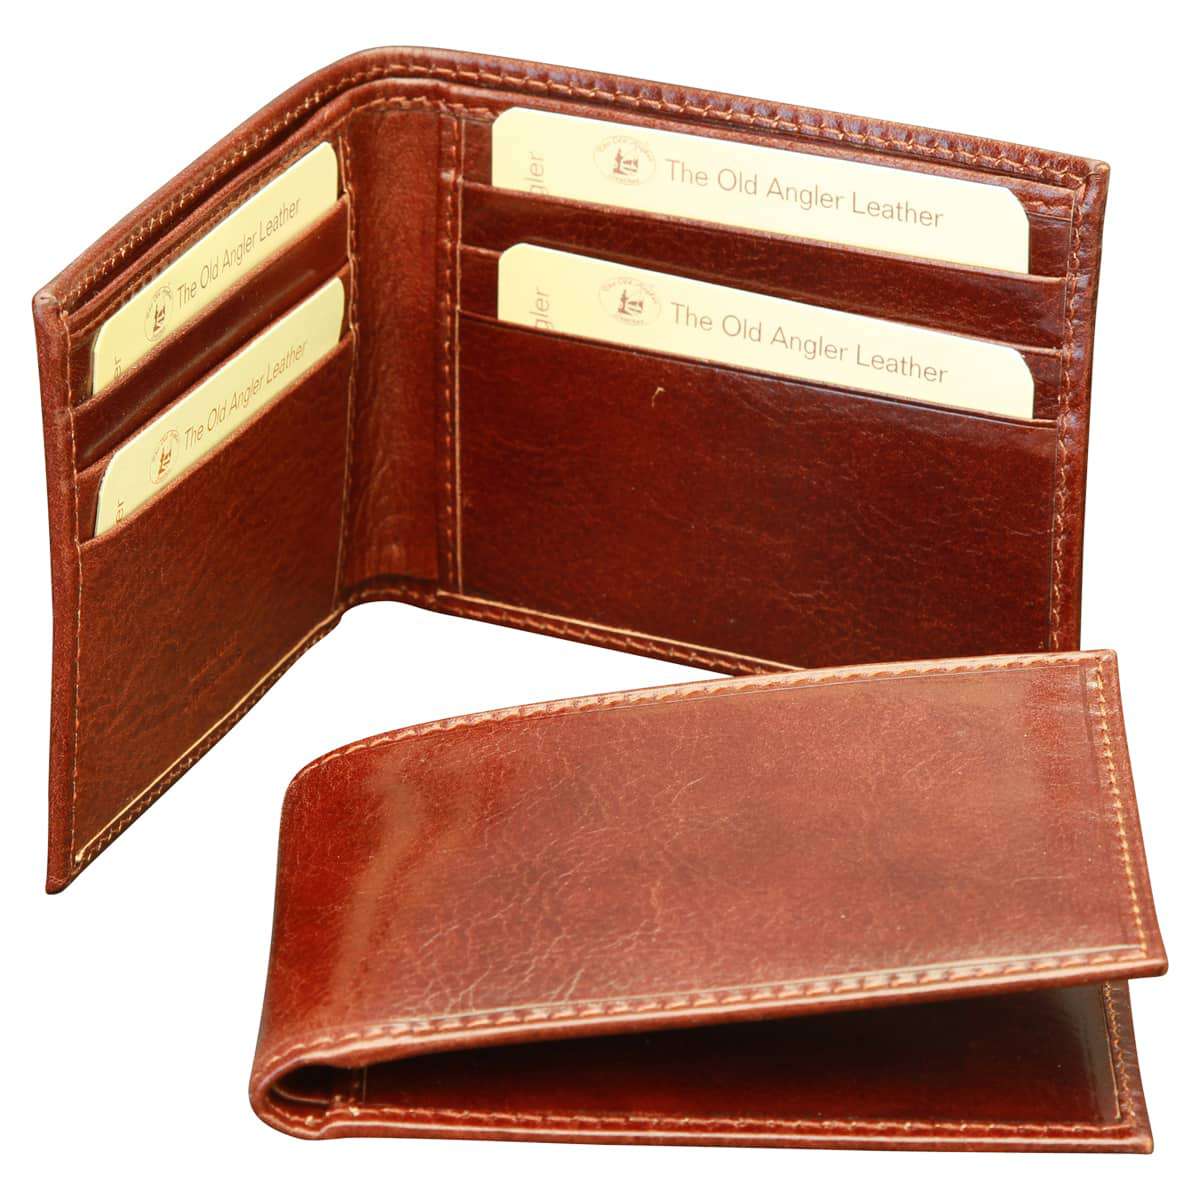 Bifold wallet with RFID blocking technology - Brown | 802605MA US | Old Angler Firenze